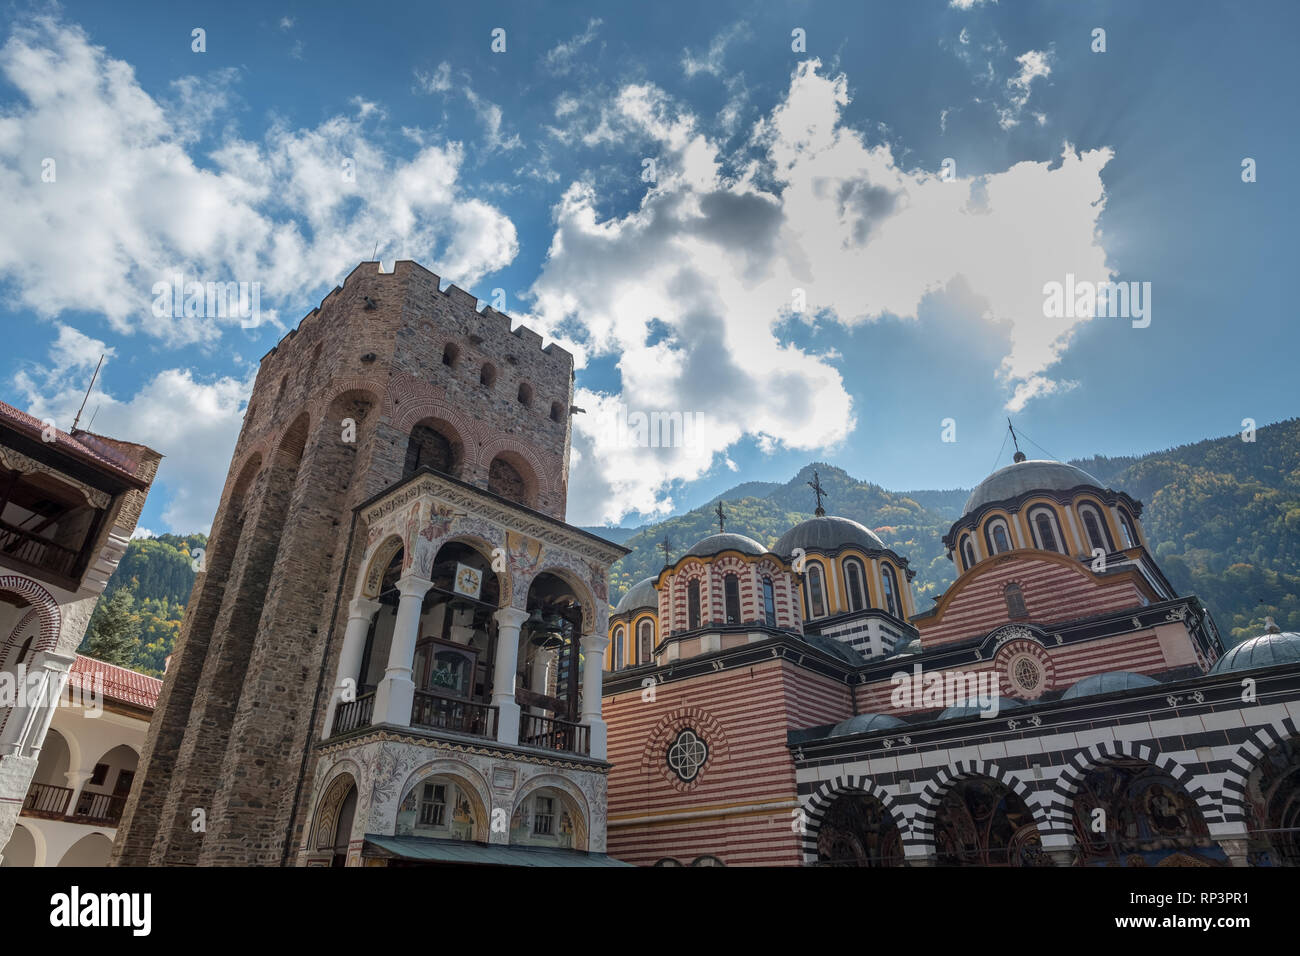 Looking up to the Tower of Hrelyu and cupola-topped main church of Rila Monastery, Bulgaria.  Sun hides behind one white cloud. Stock Photo